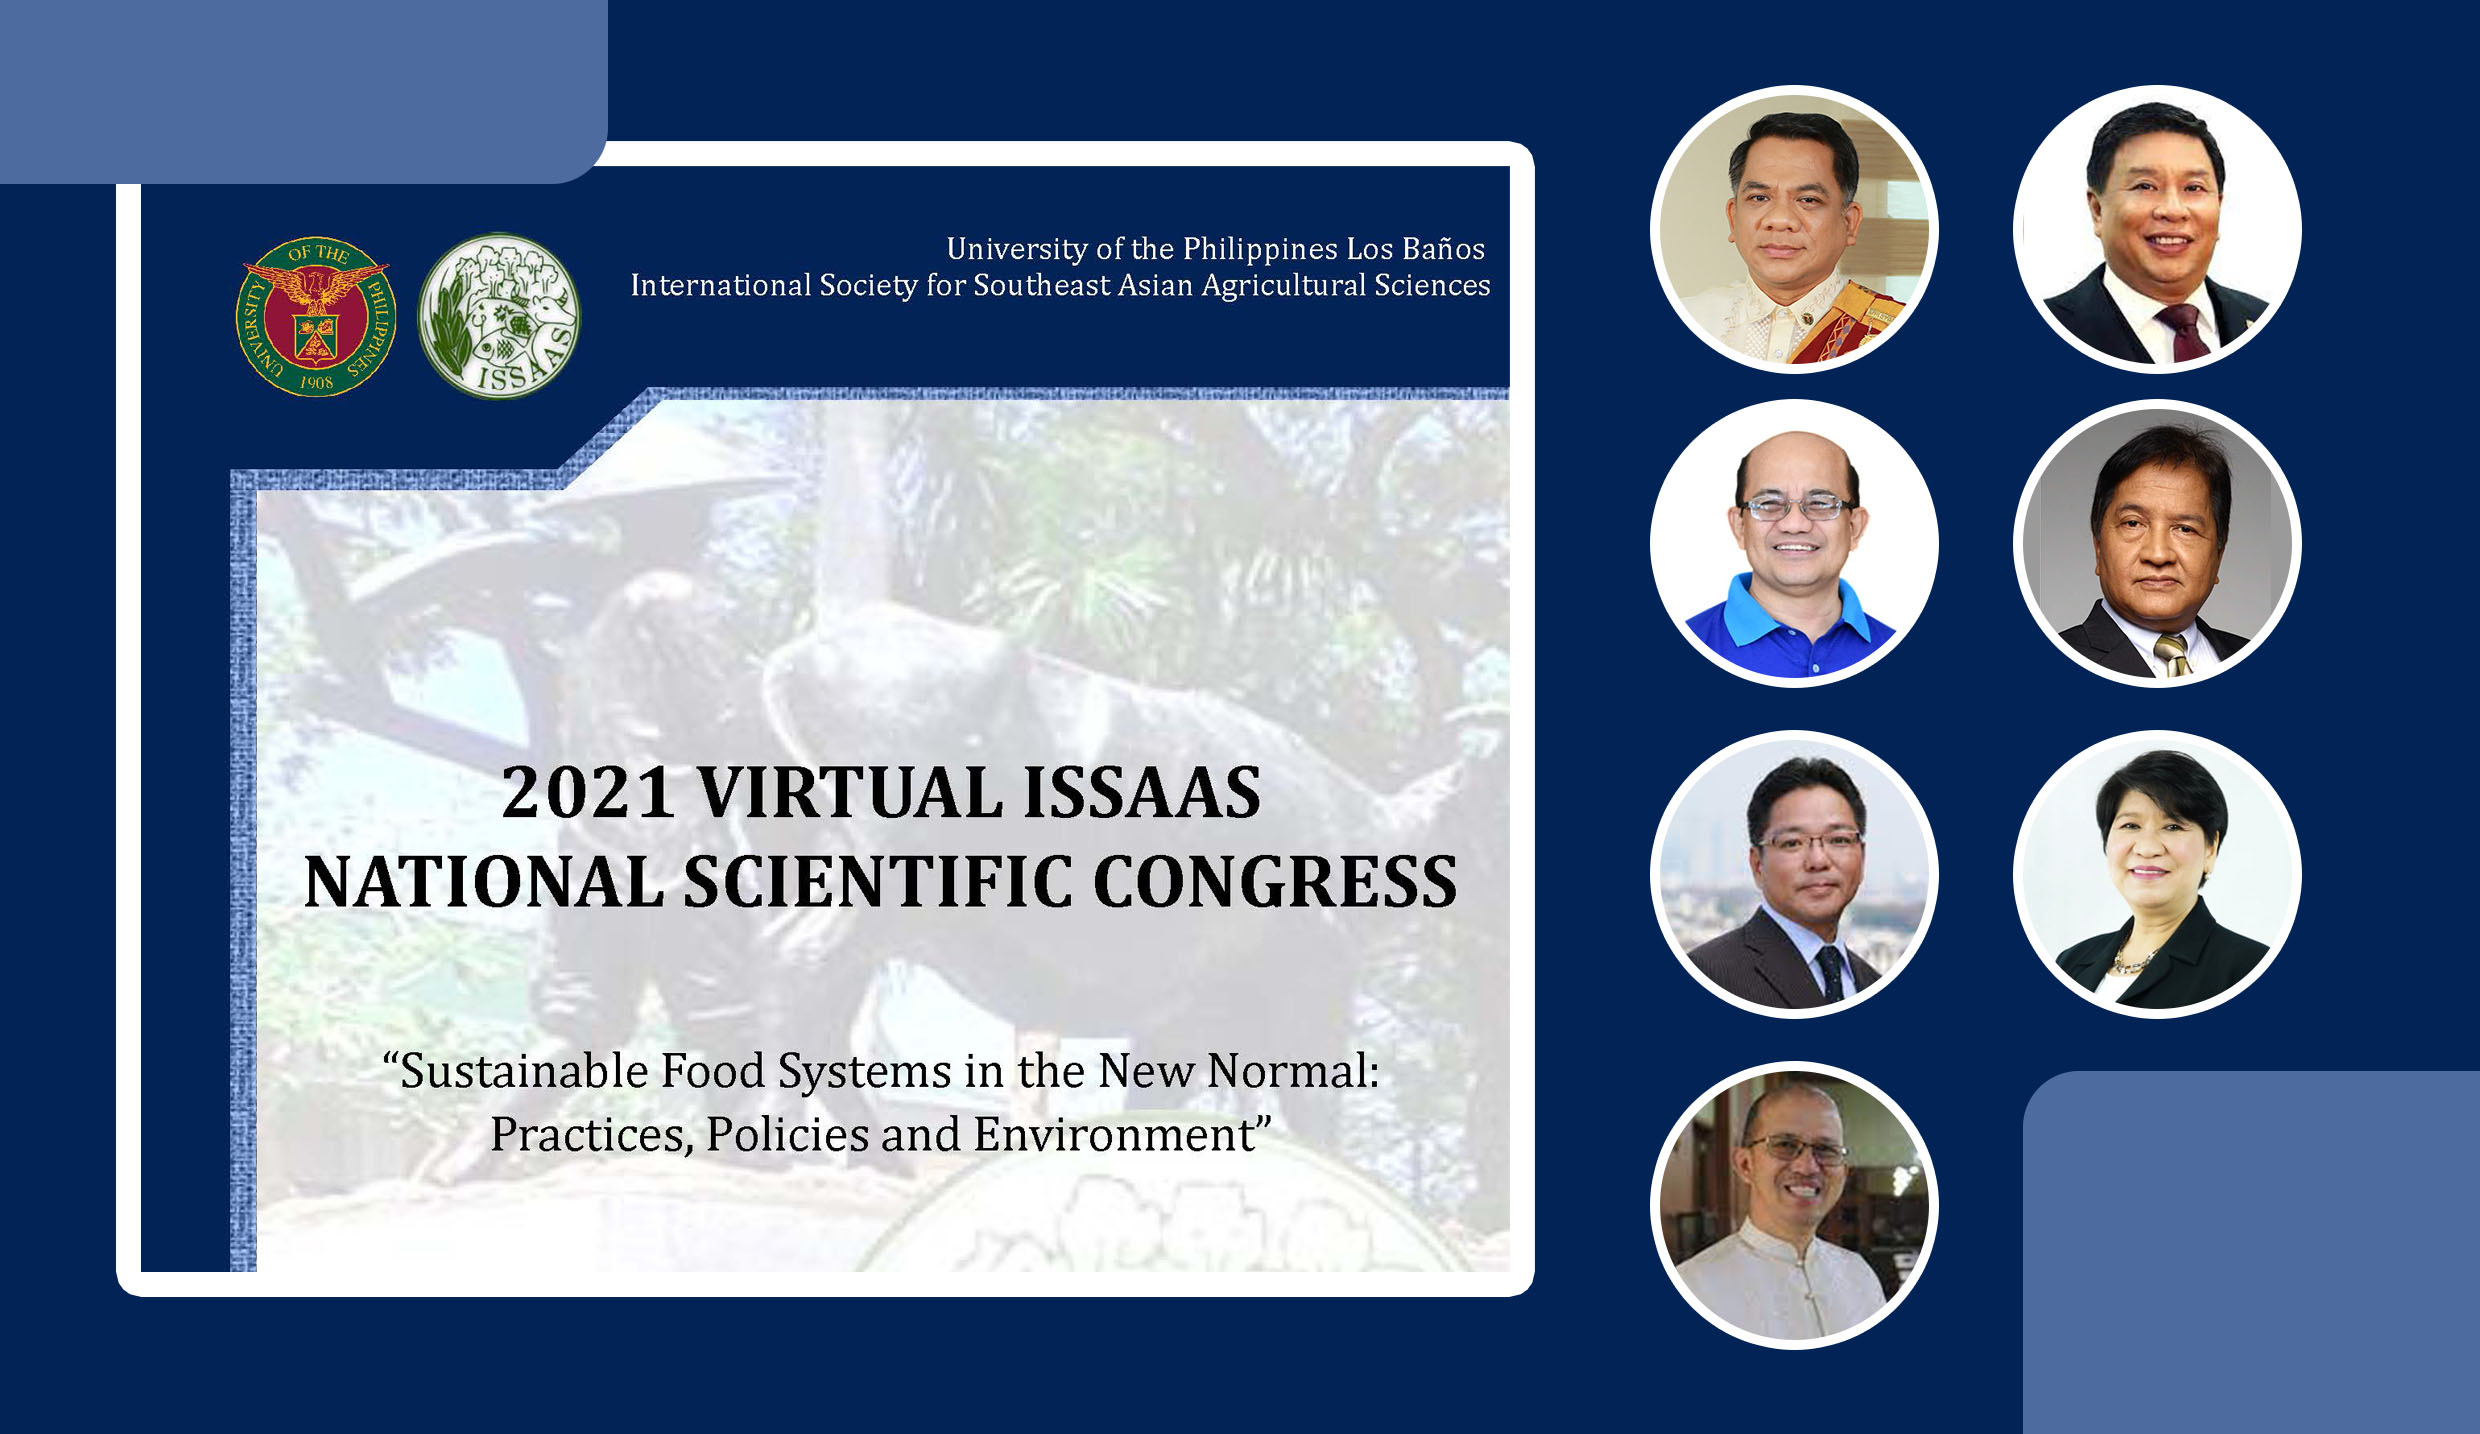 Agri scientists across Asia call for sustainable food systems in the new normal￼